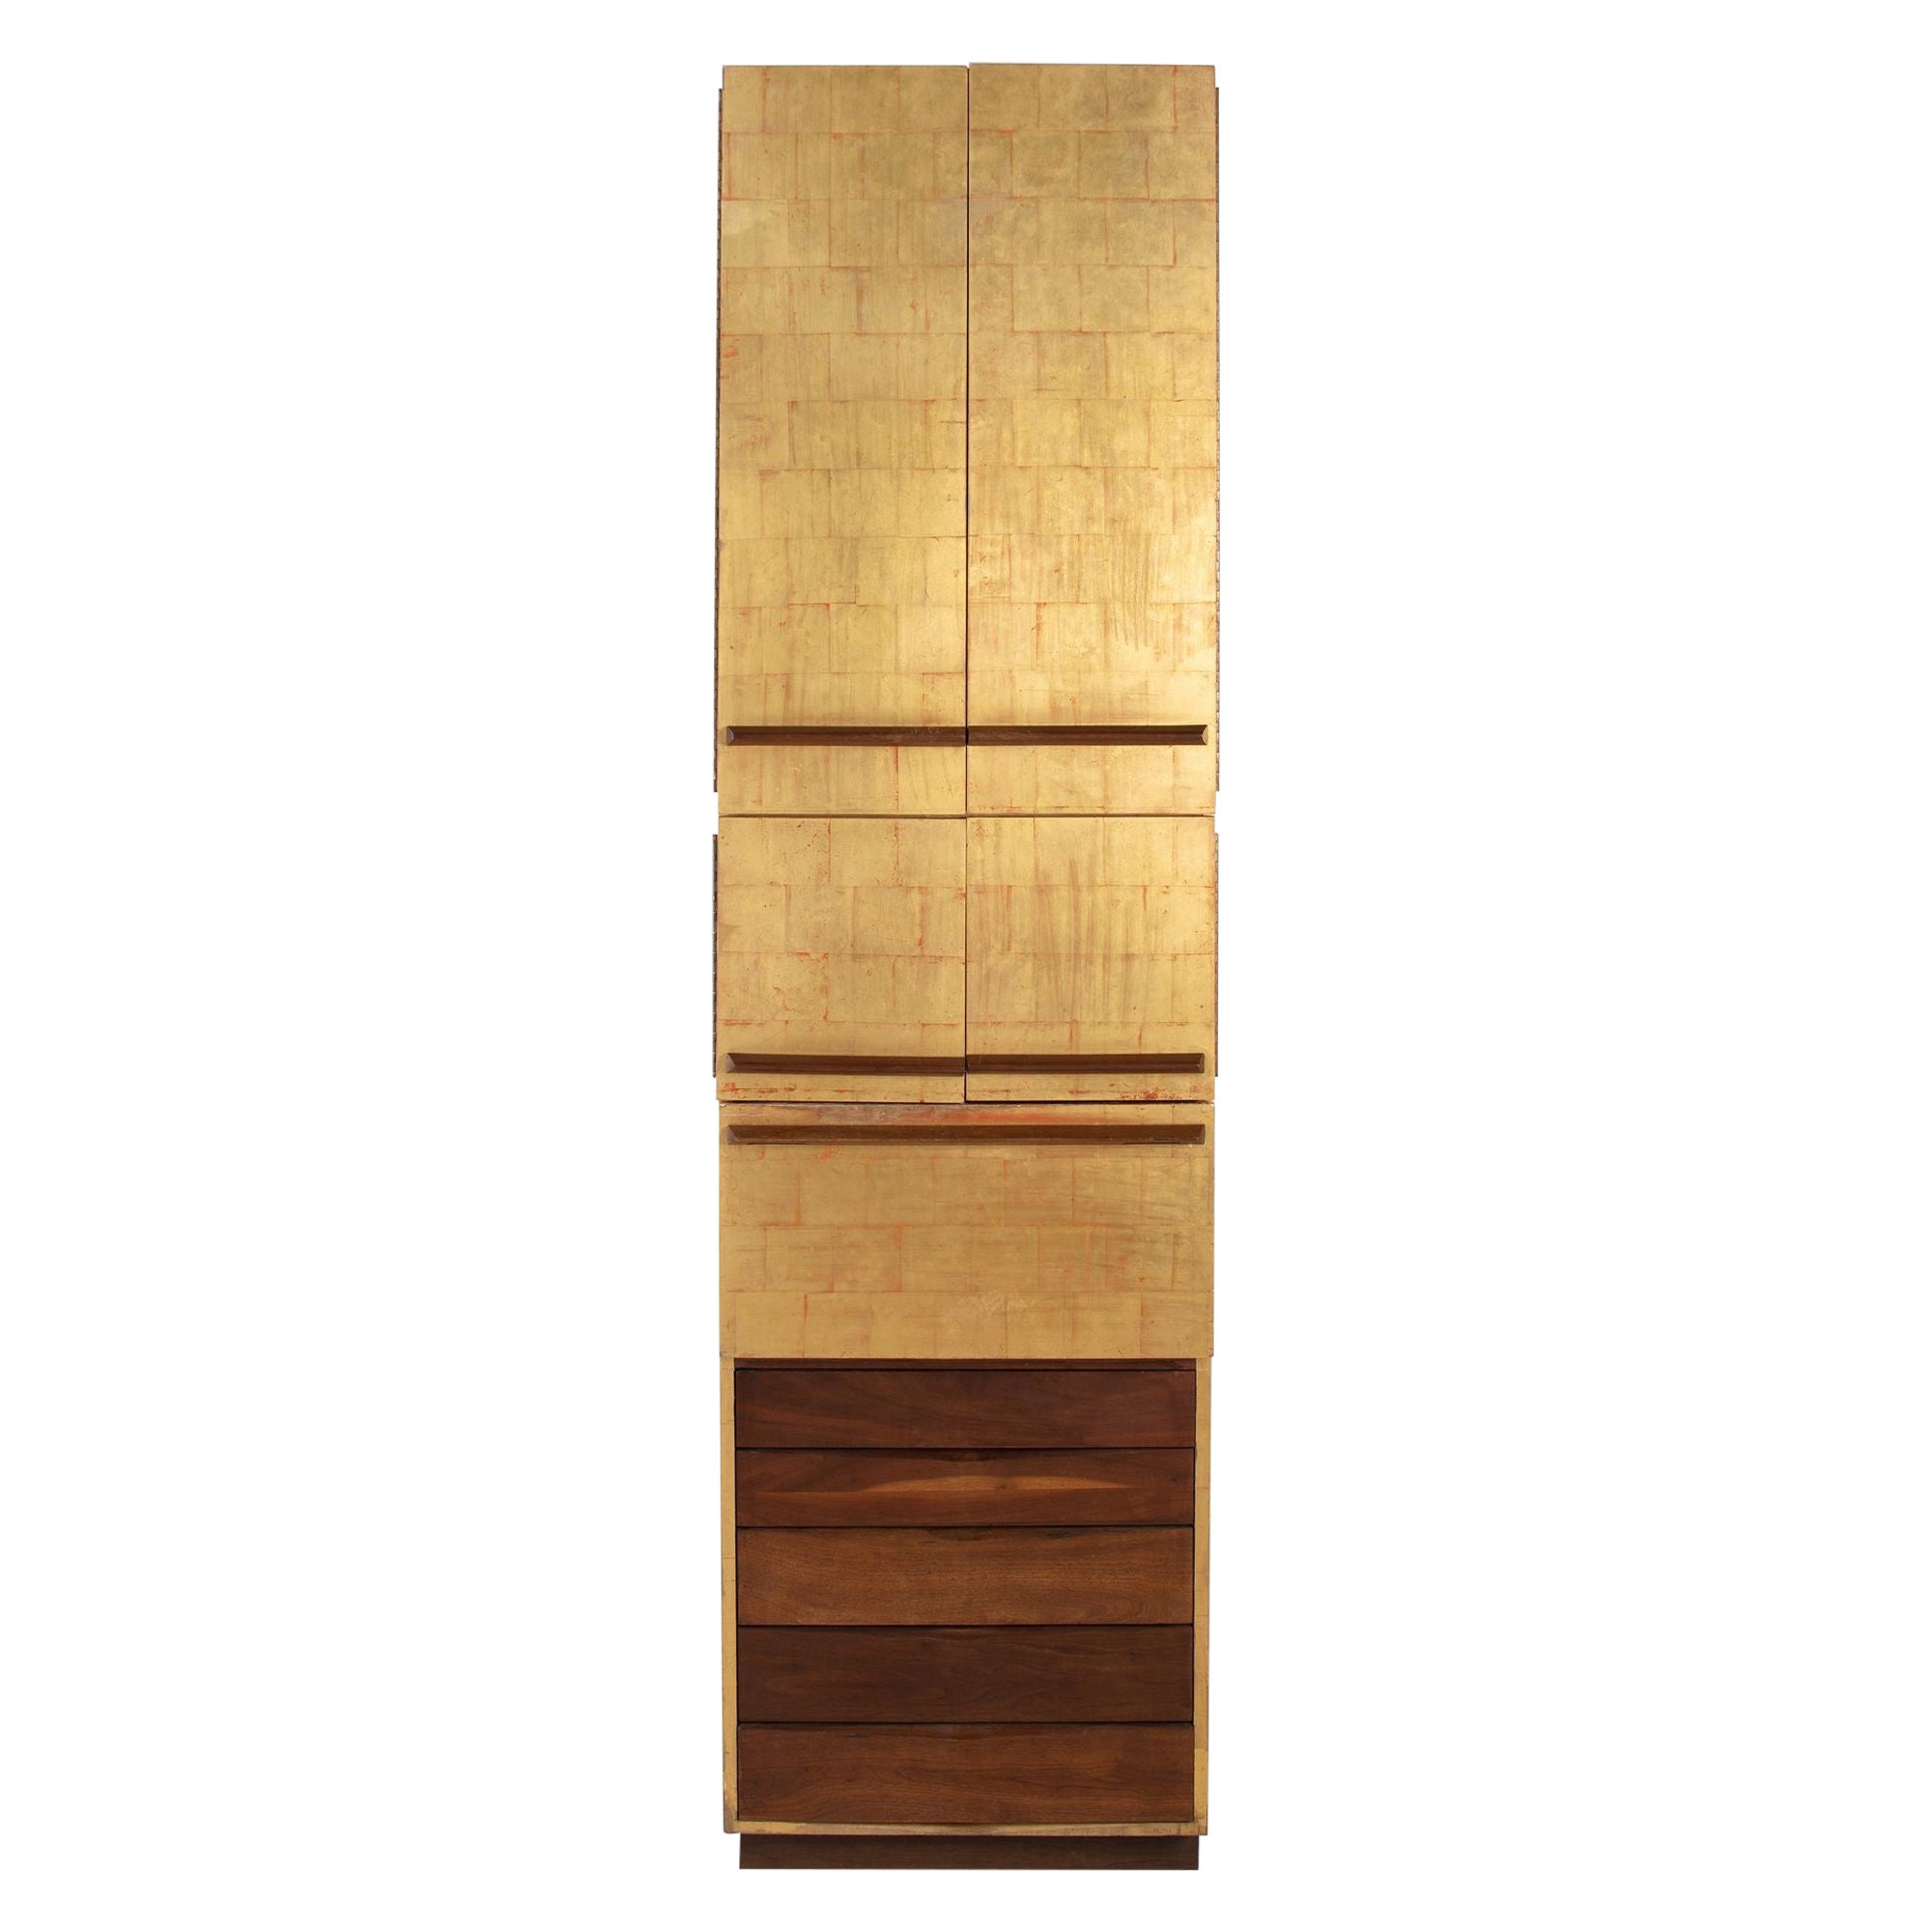 Paul Evans and Phillip Lloyd Powell Gold Leaf and Walnut Studio Cabinet, 1963